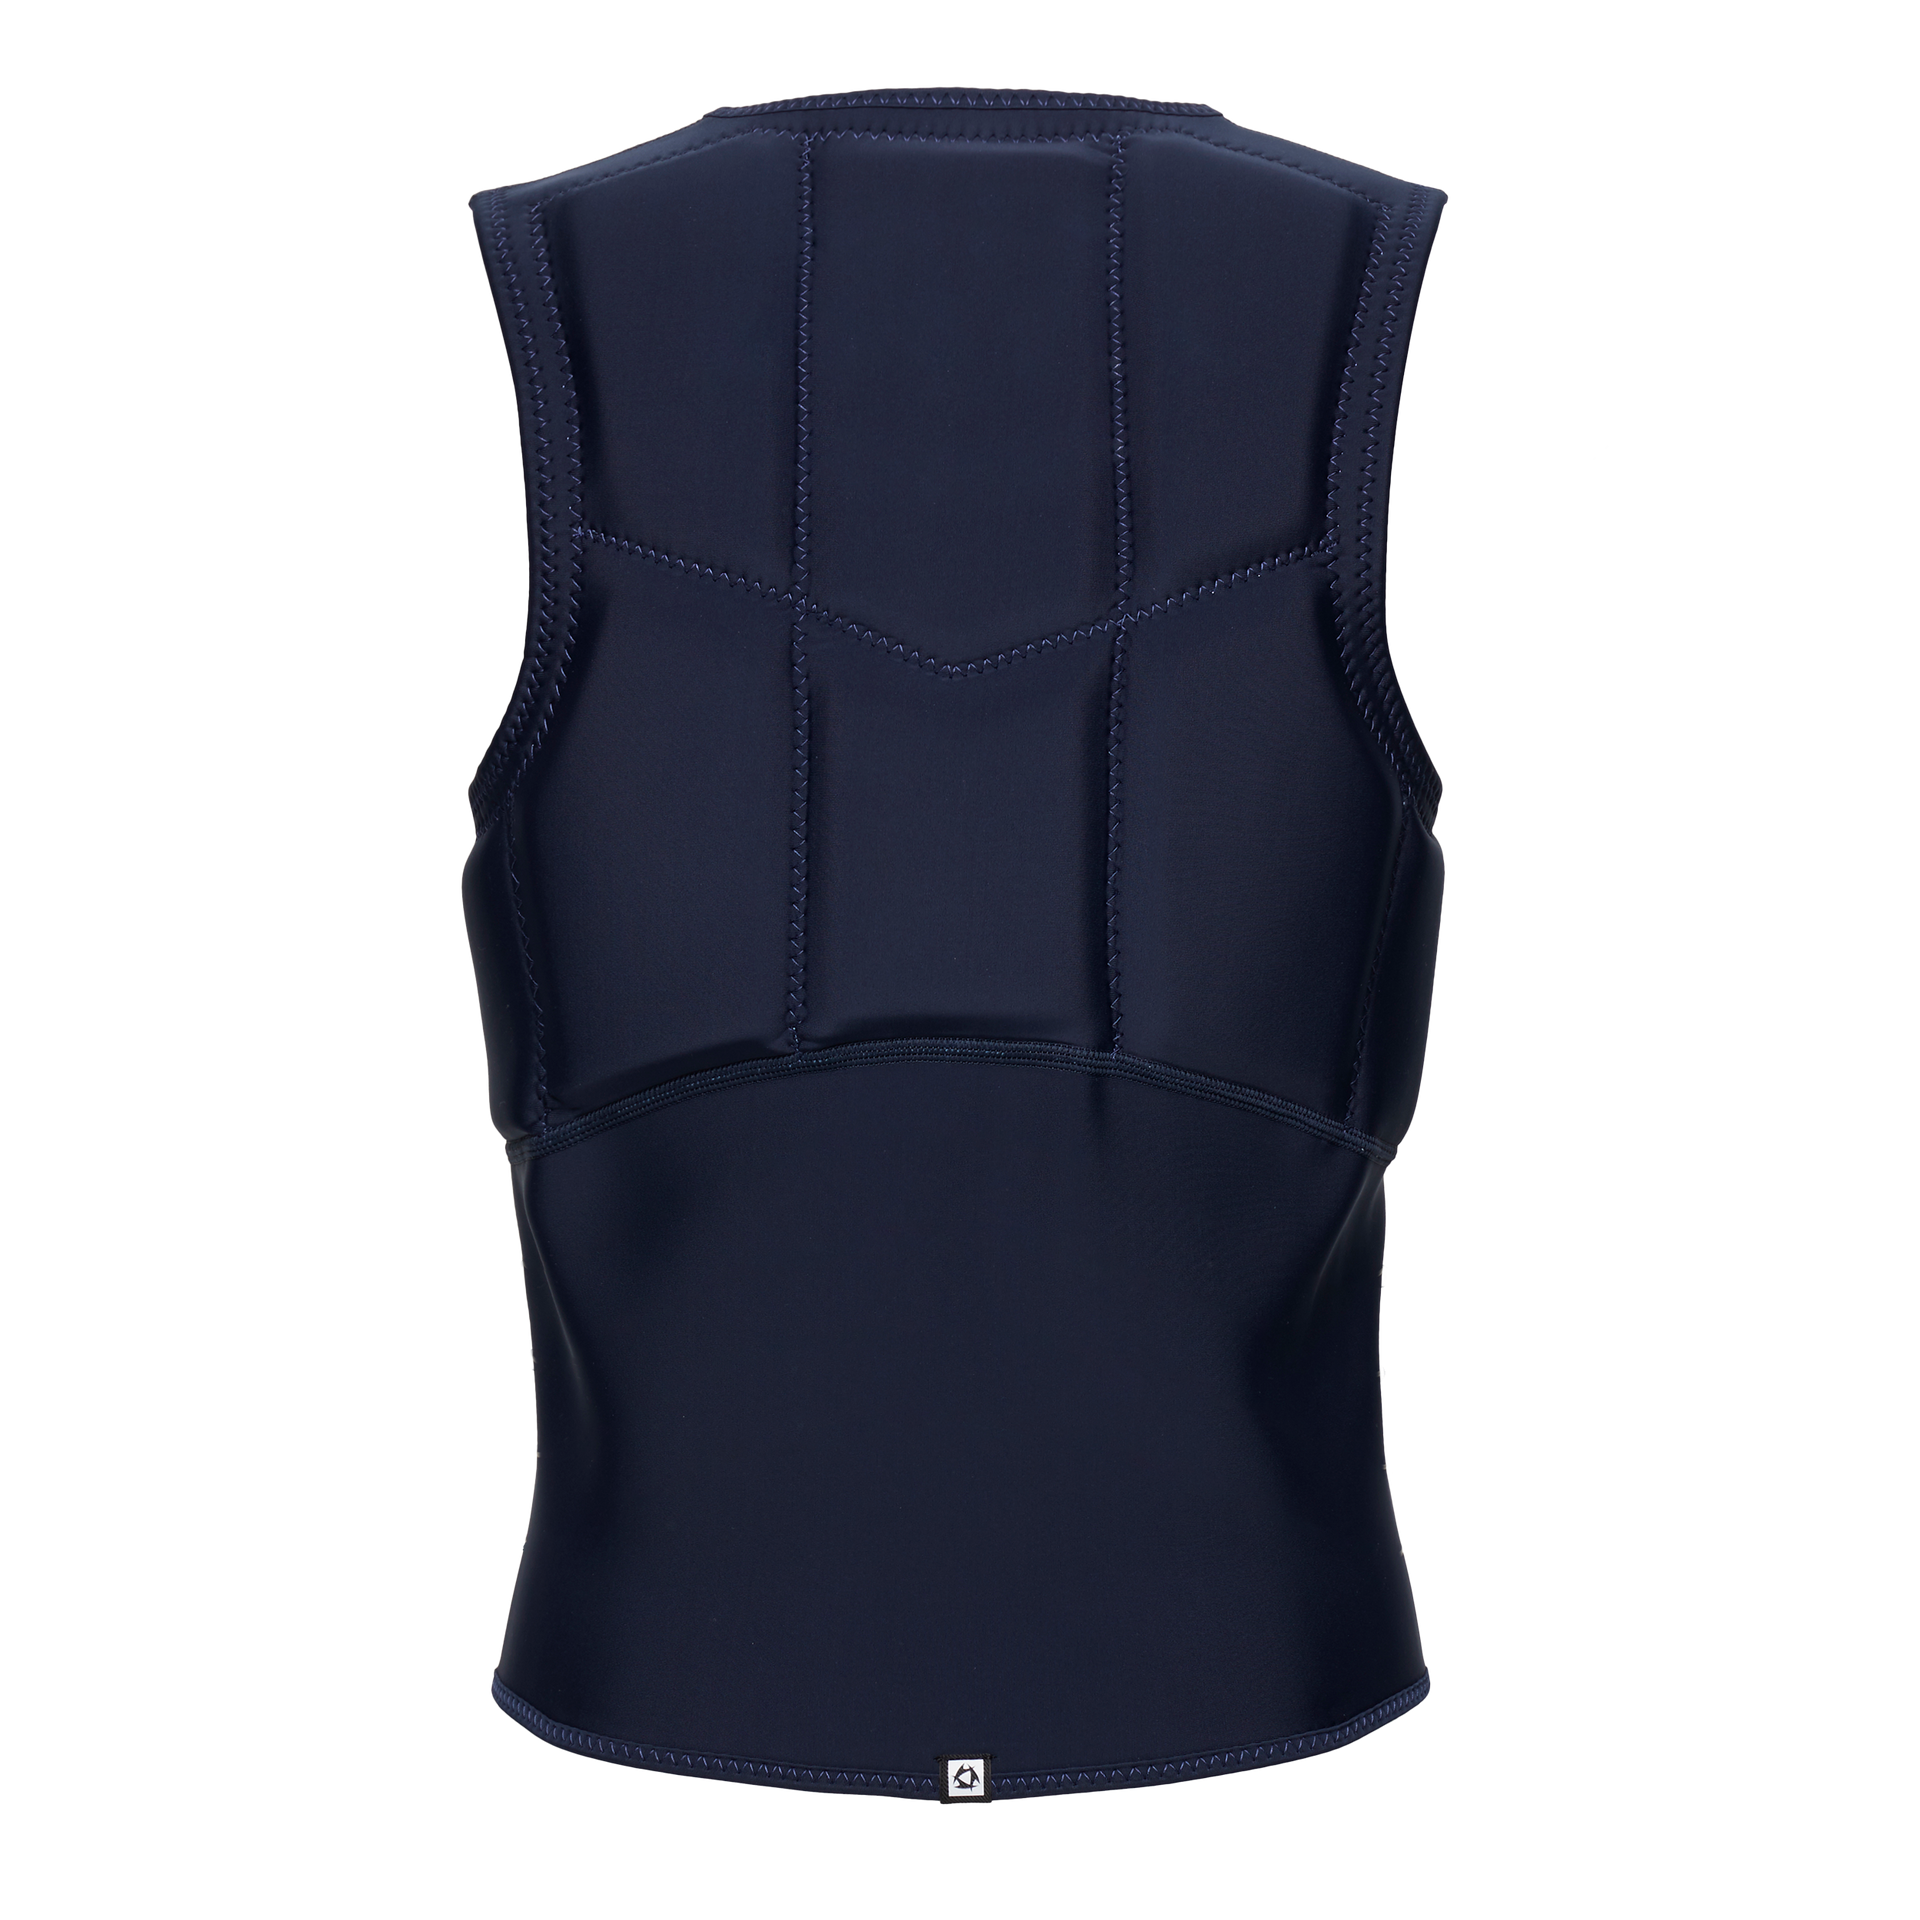 Product_image_2_Navy